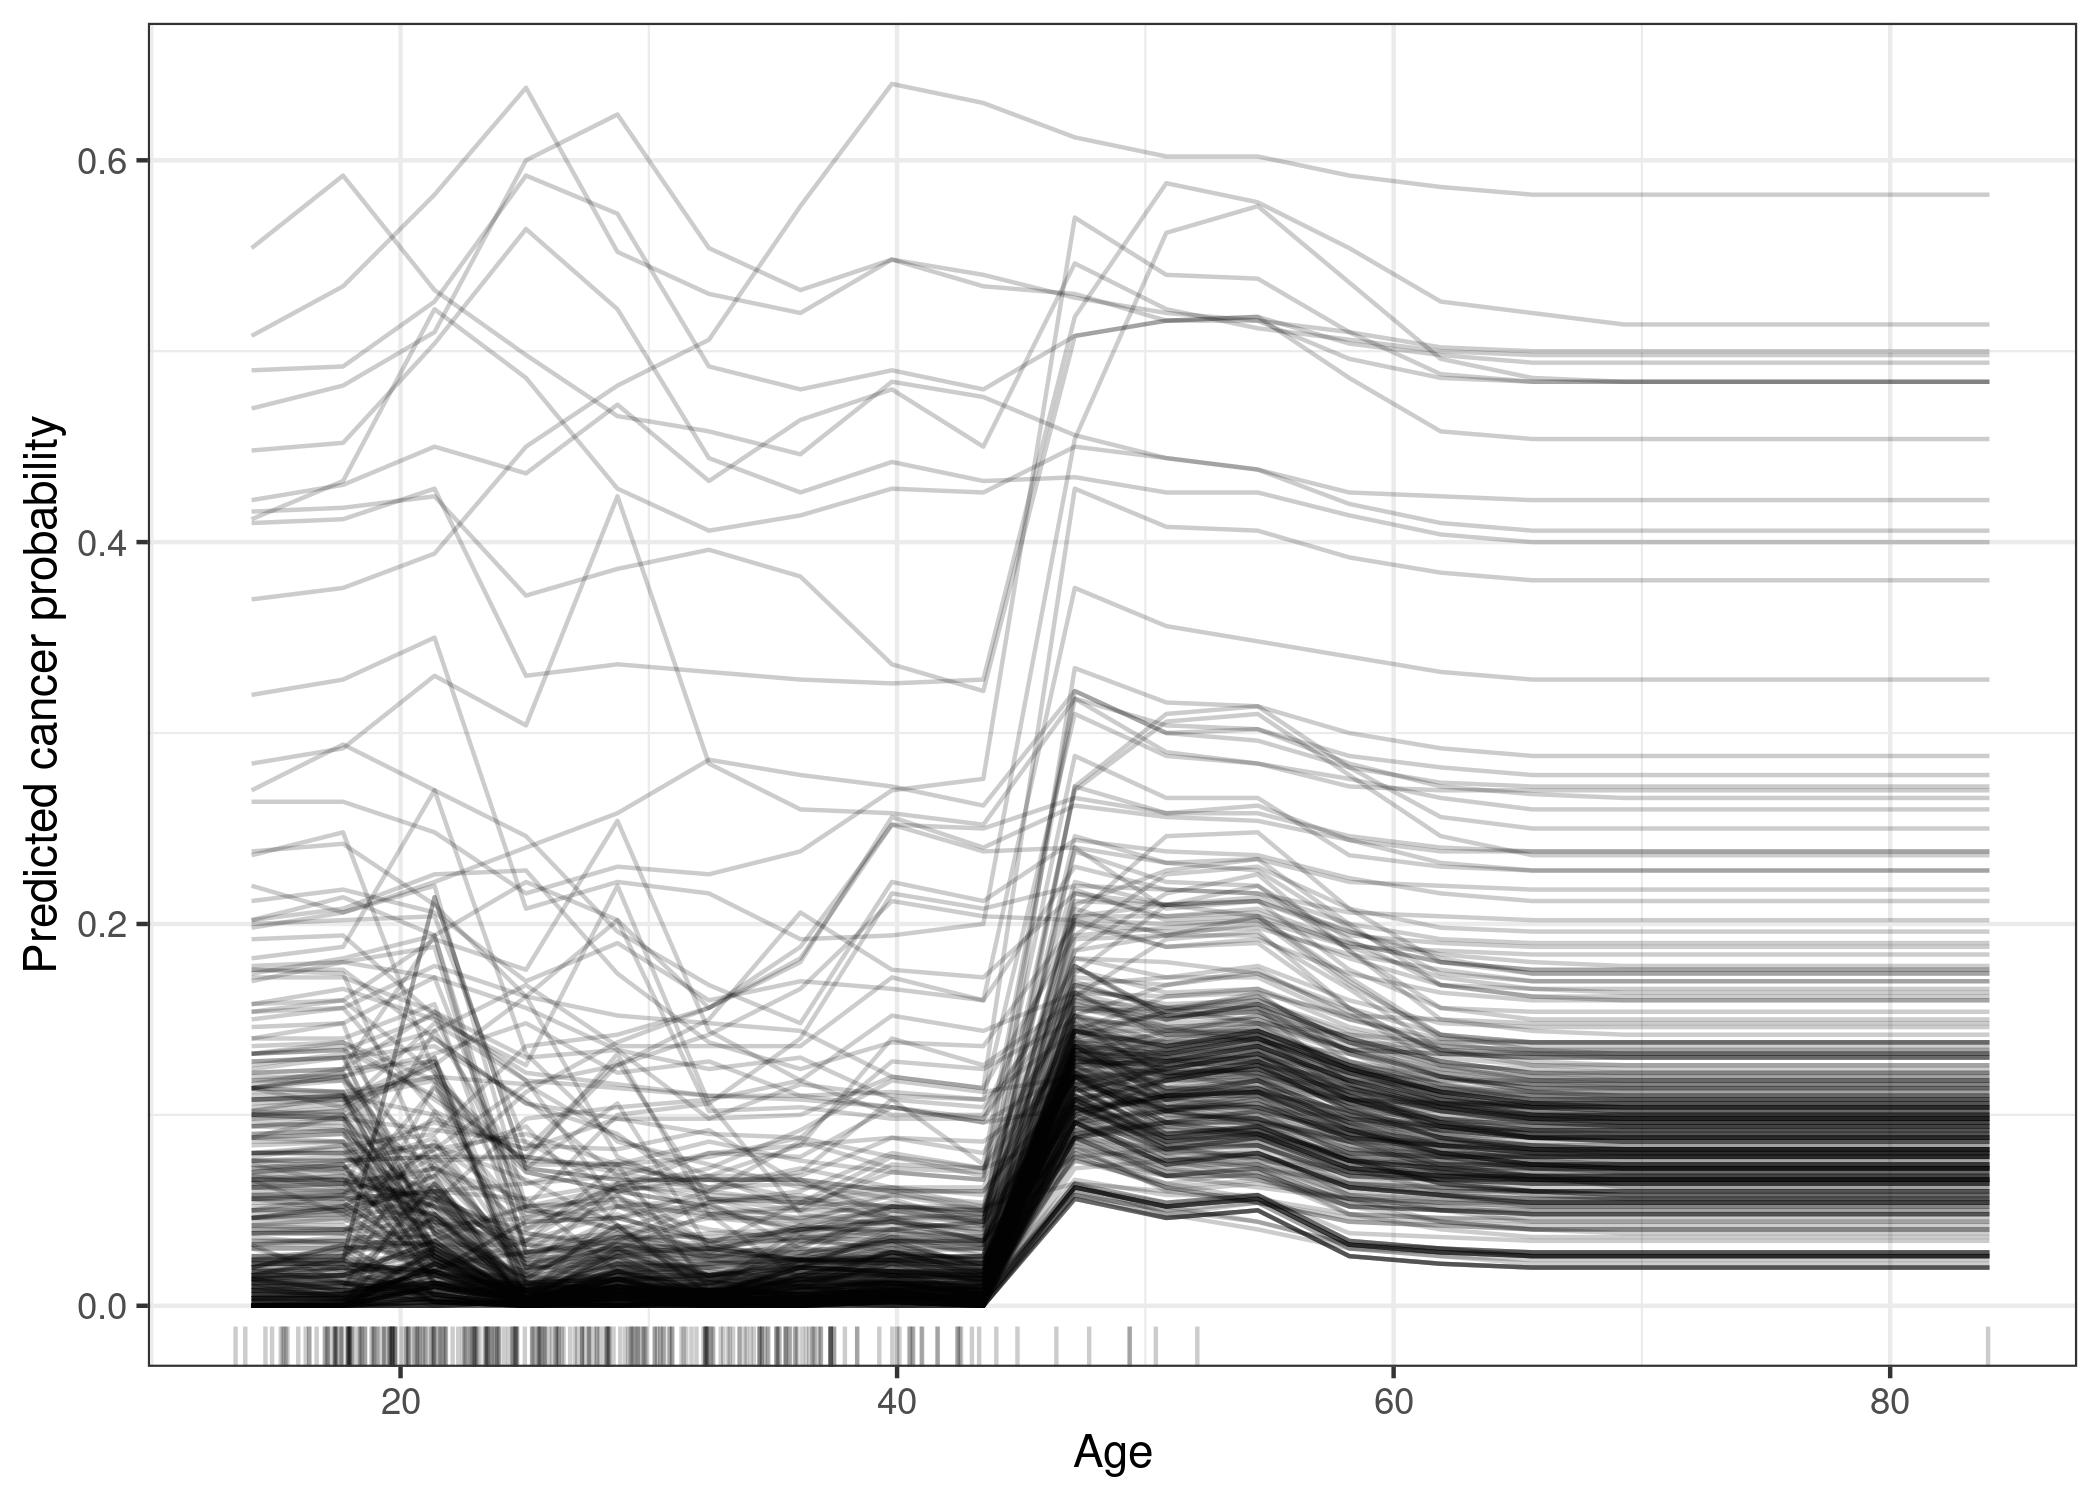 ICE plot of cervical cancer probability by age. Each line represents one woman. For most women there is an increase in predicted cancer probability with increasing age. For some women with a predicted cancer probability above 0.4, the prediction does not change much at higher age.